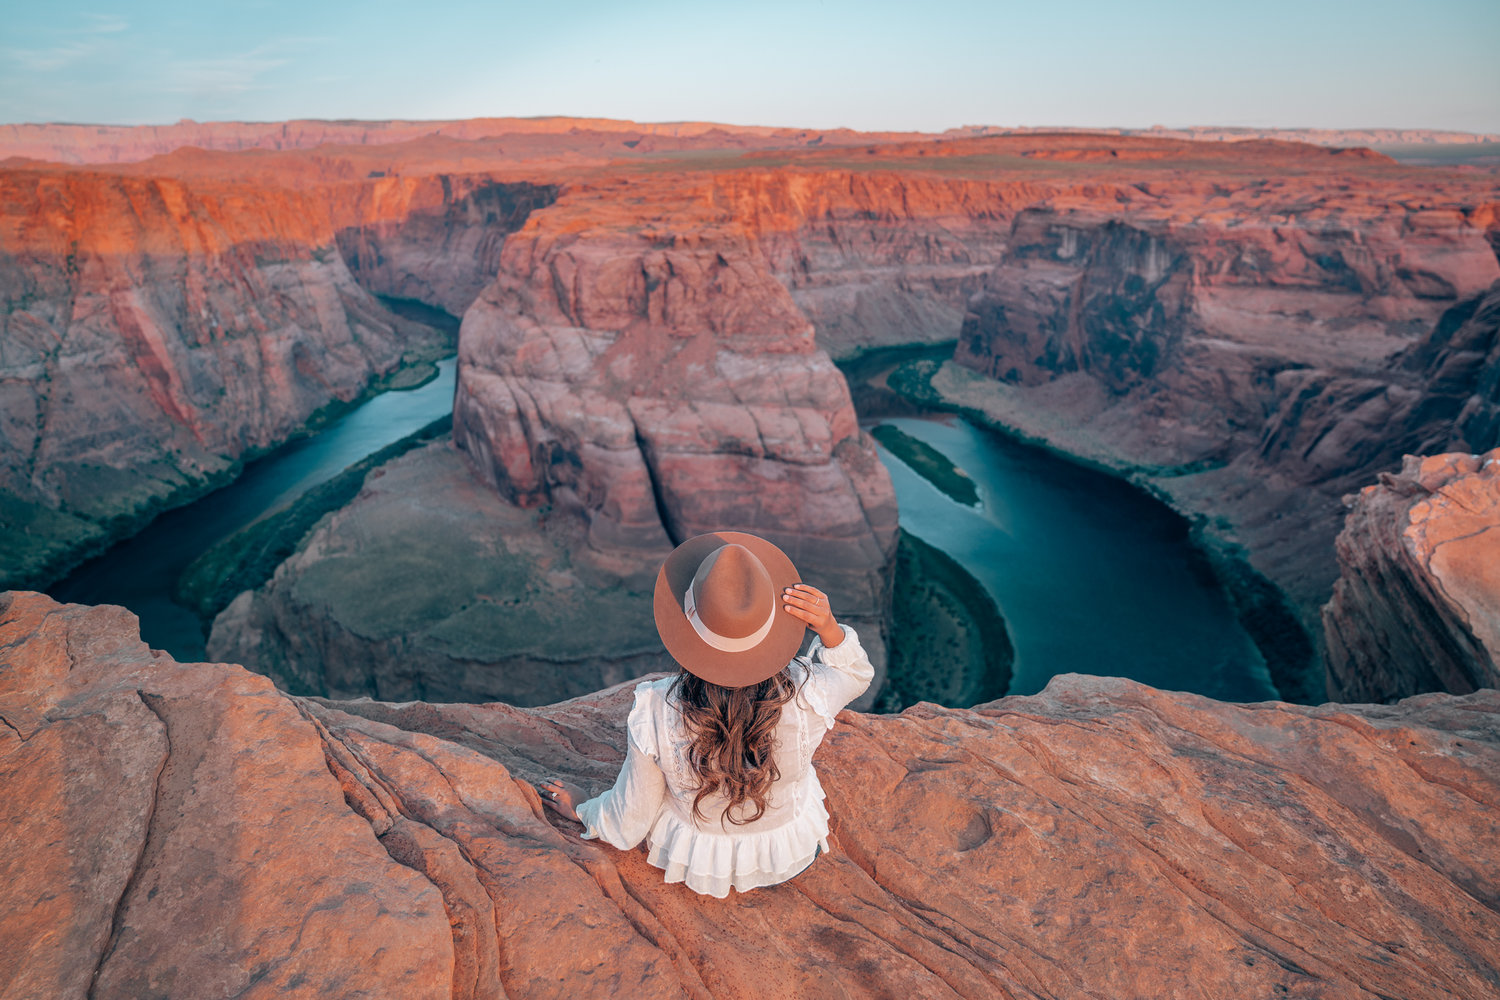 Horseshoe Bend To Antelope Canyon - Get All The Details For The Tour Of Your Life